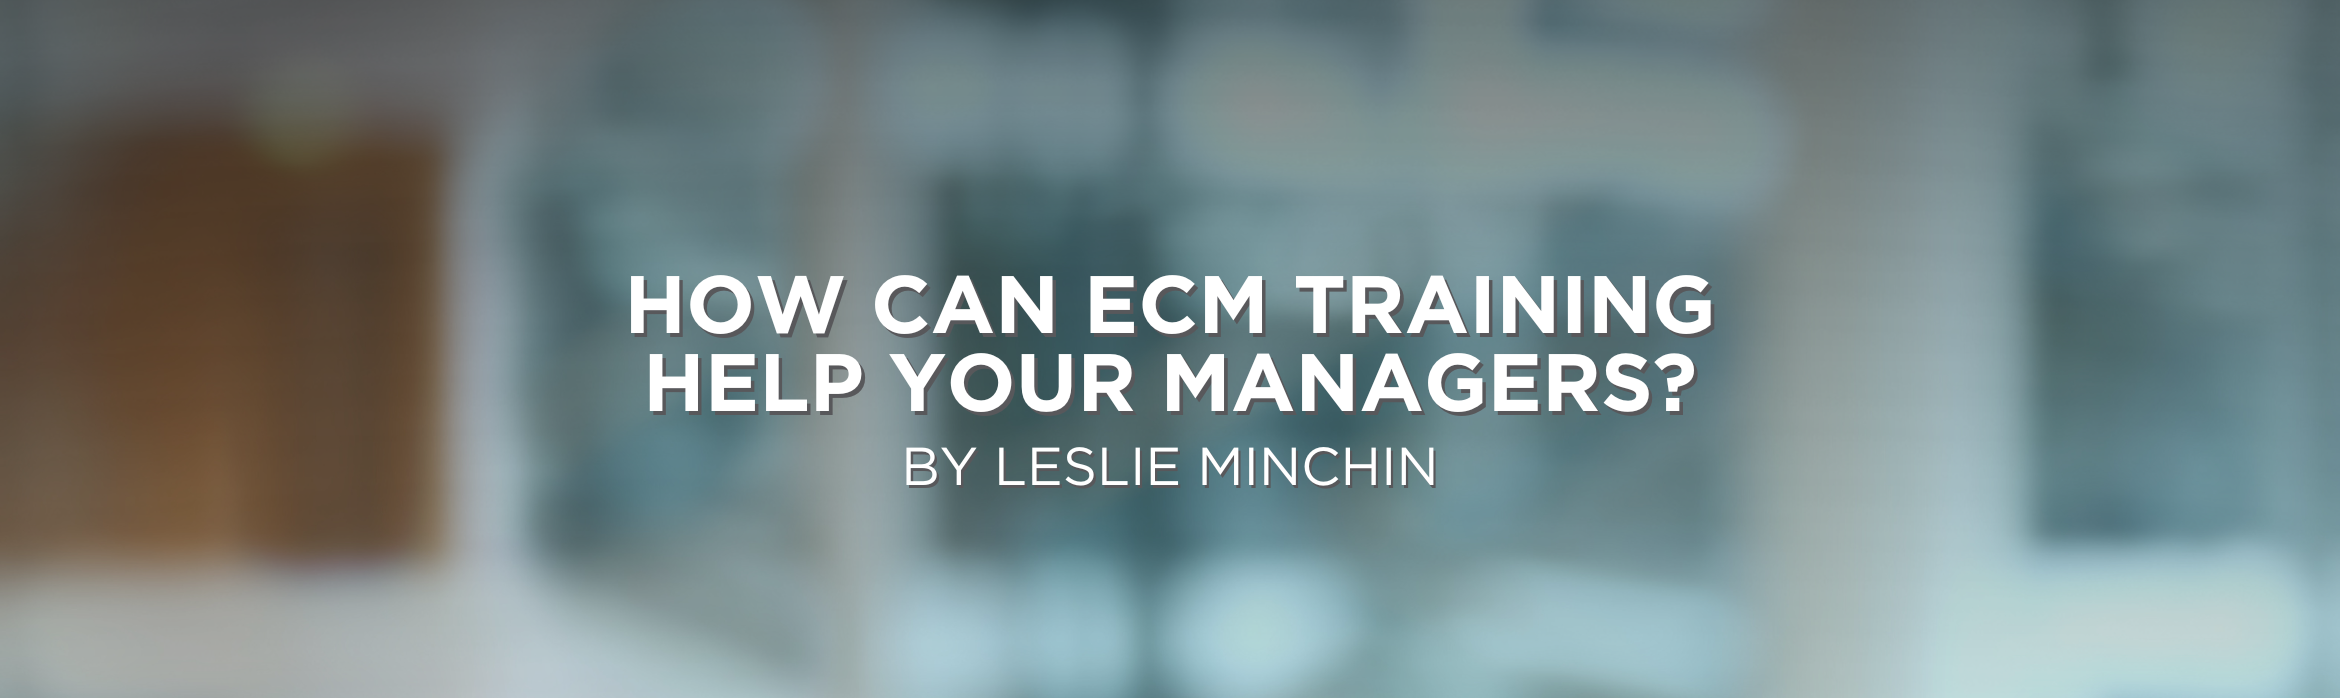 How Can ECM Training Help Your Managers?